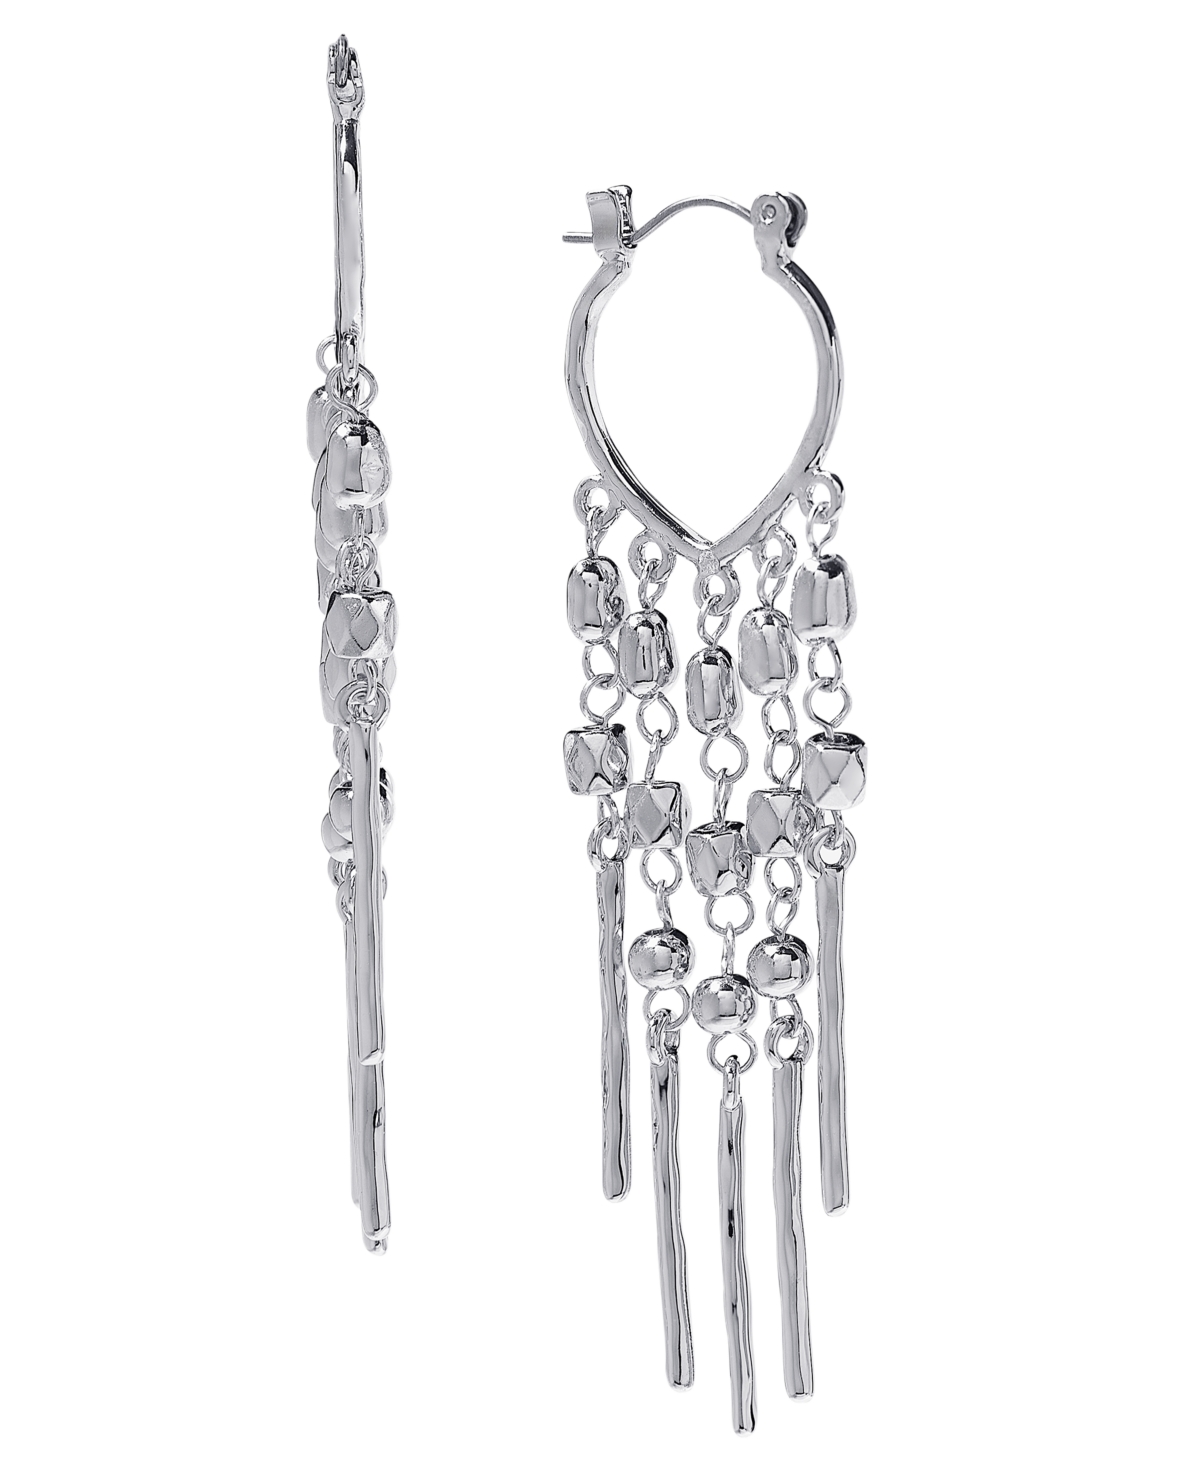 Mixed Bead Fringe Statement Earrings, Created for Macy's - Silver